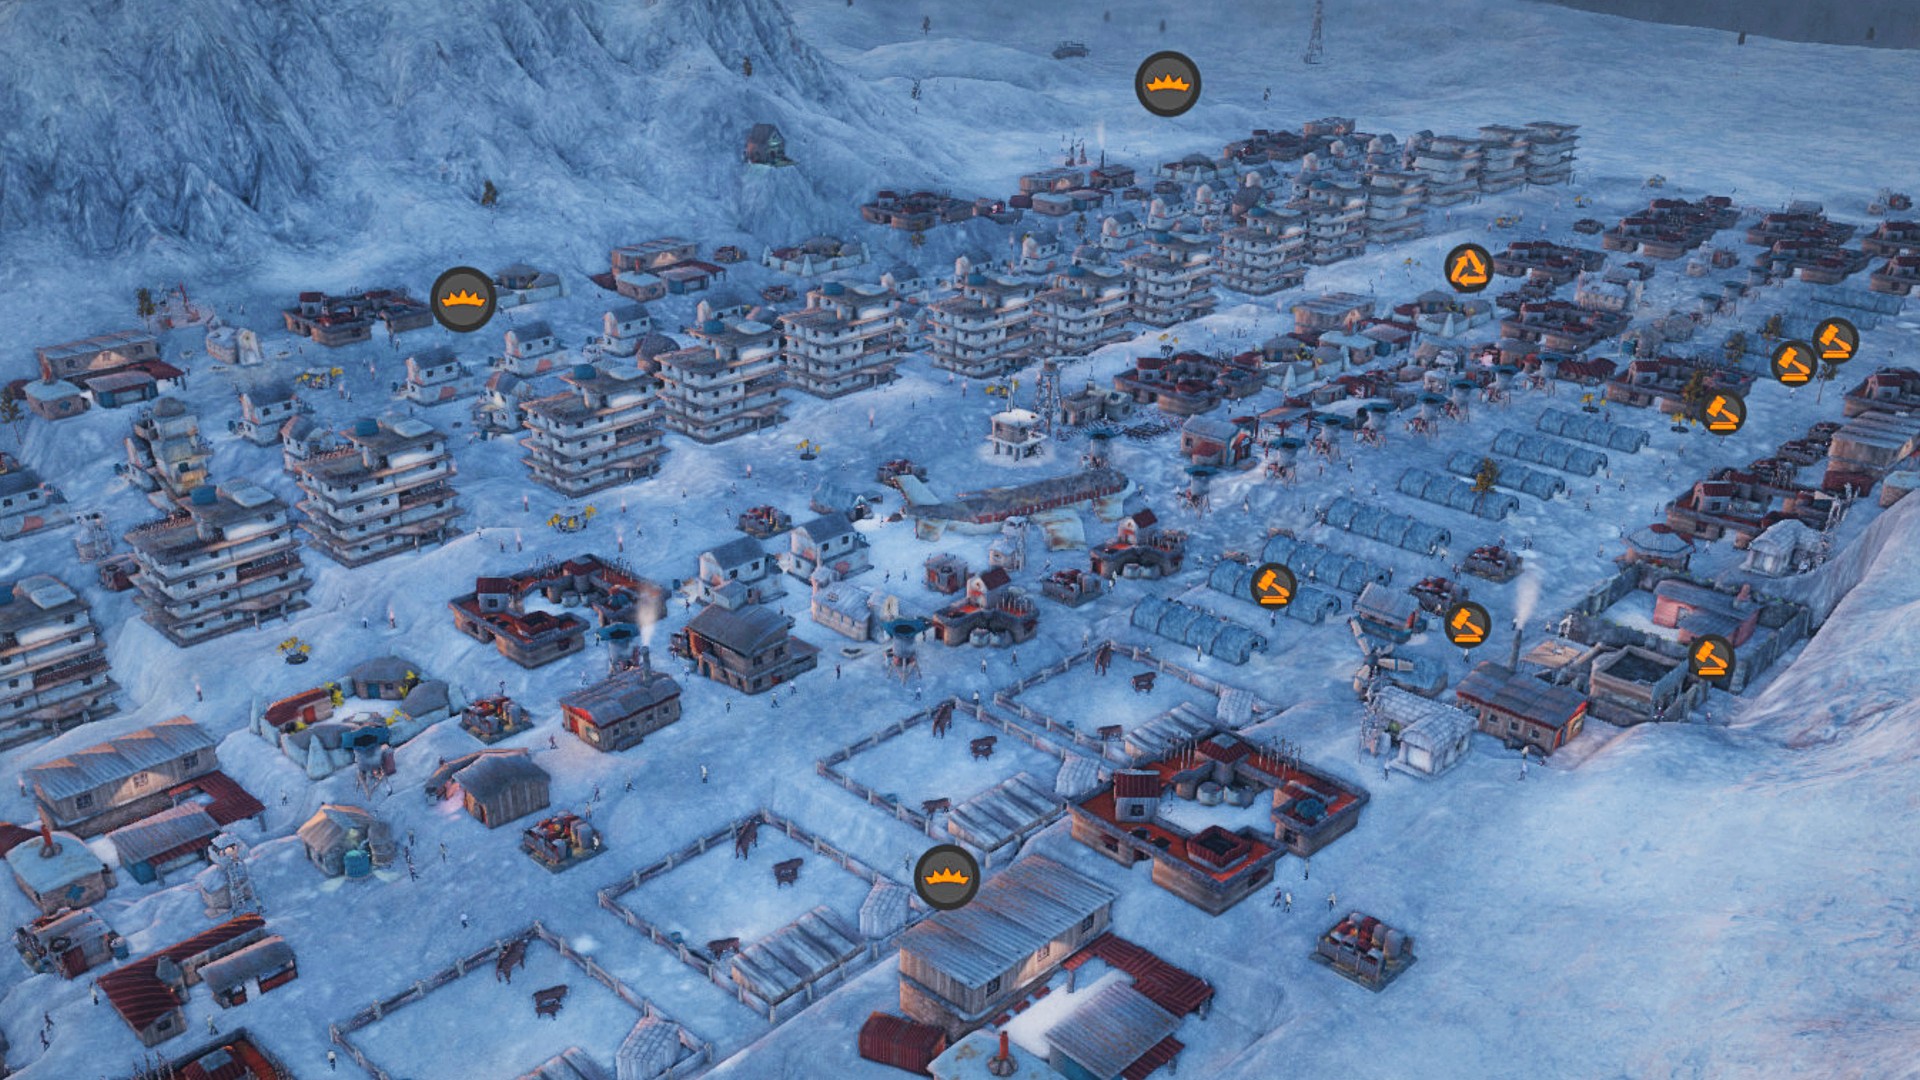 Atomic Society is a Fallout-style city builder that’s just left Steam Early Access